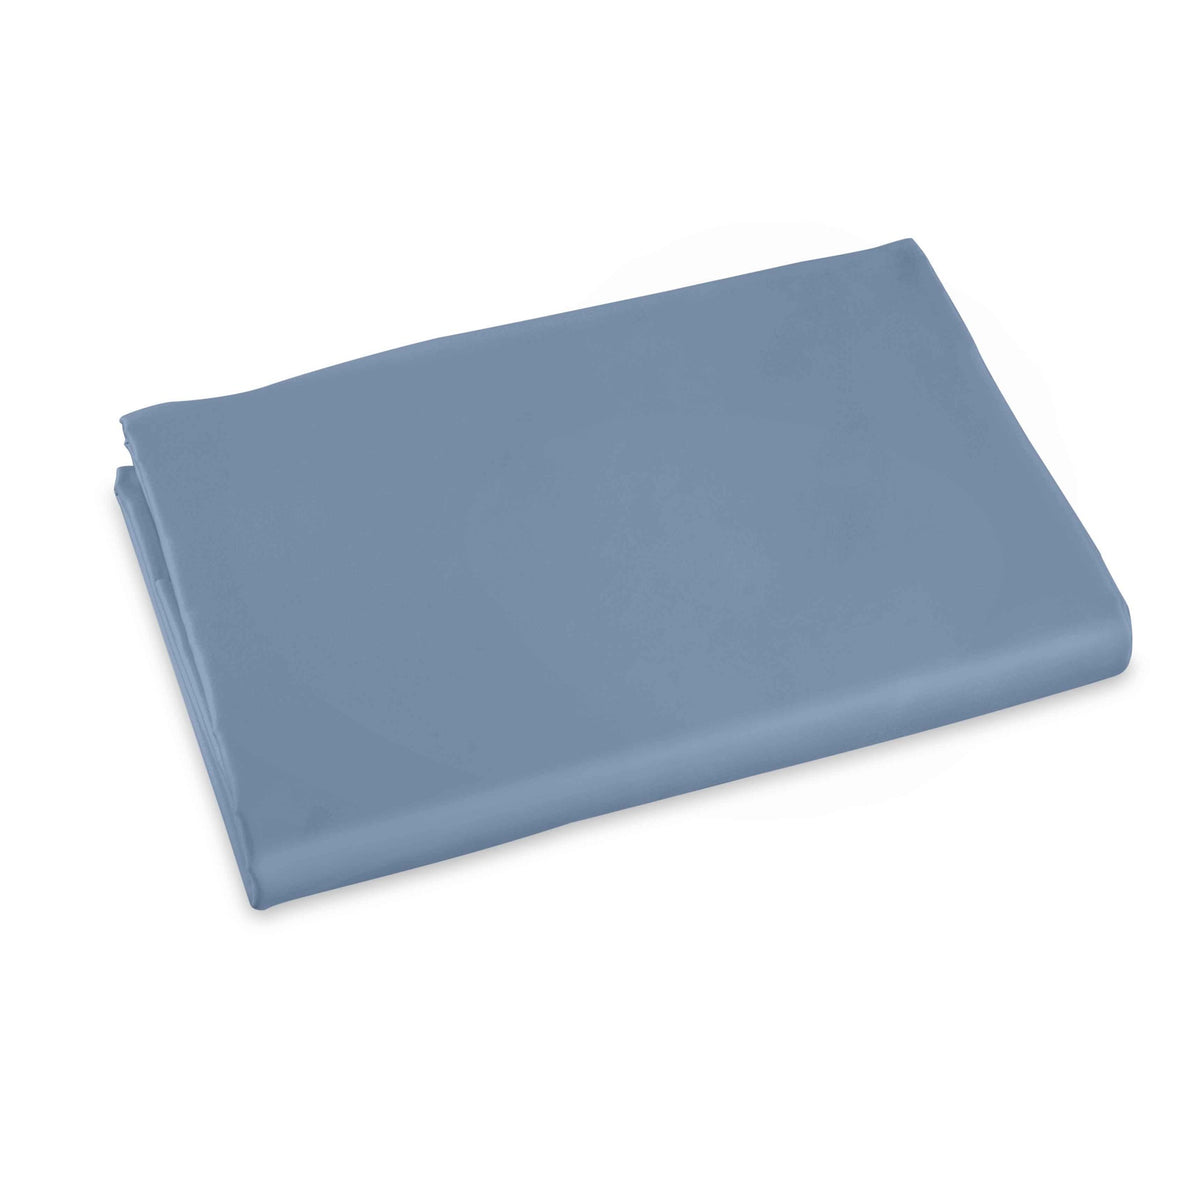 Clear Image of Signoria Raffaello Fitted Sheet in Air Force Blue Color